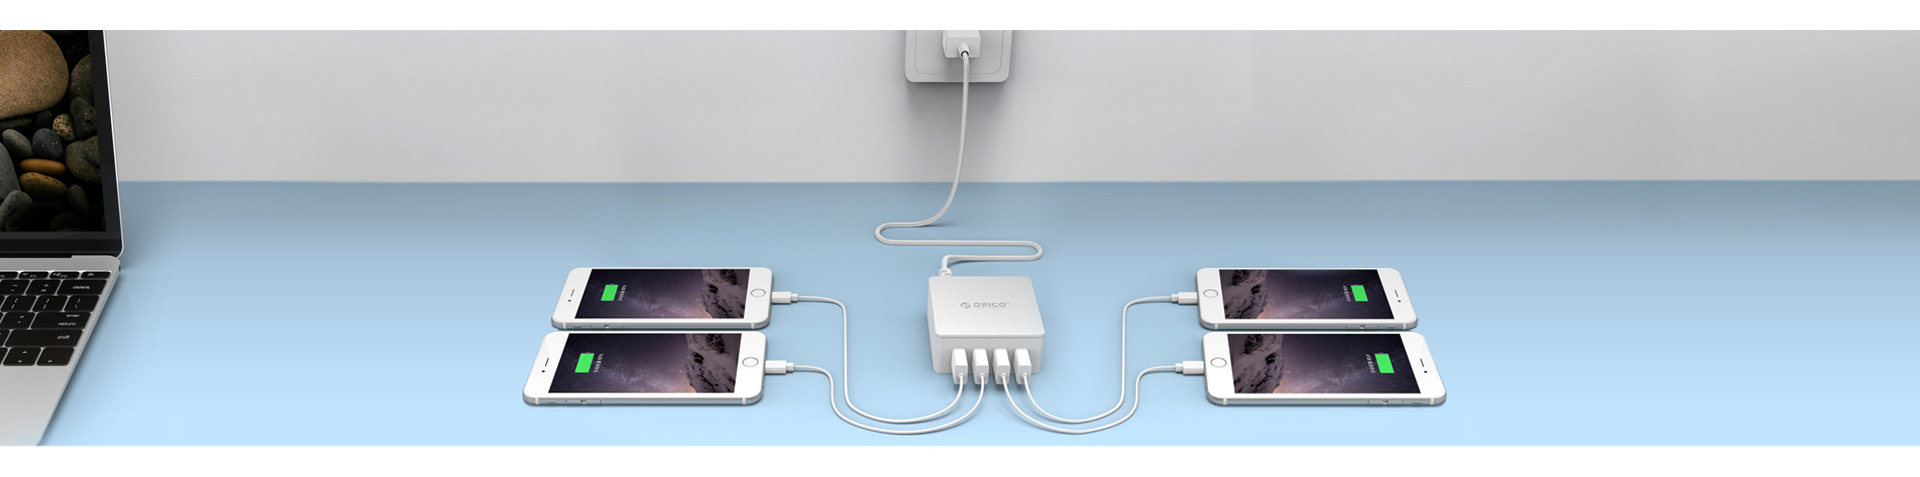 Charge four devices at the same time